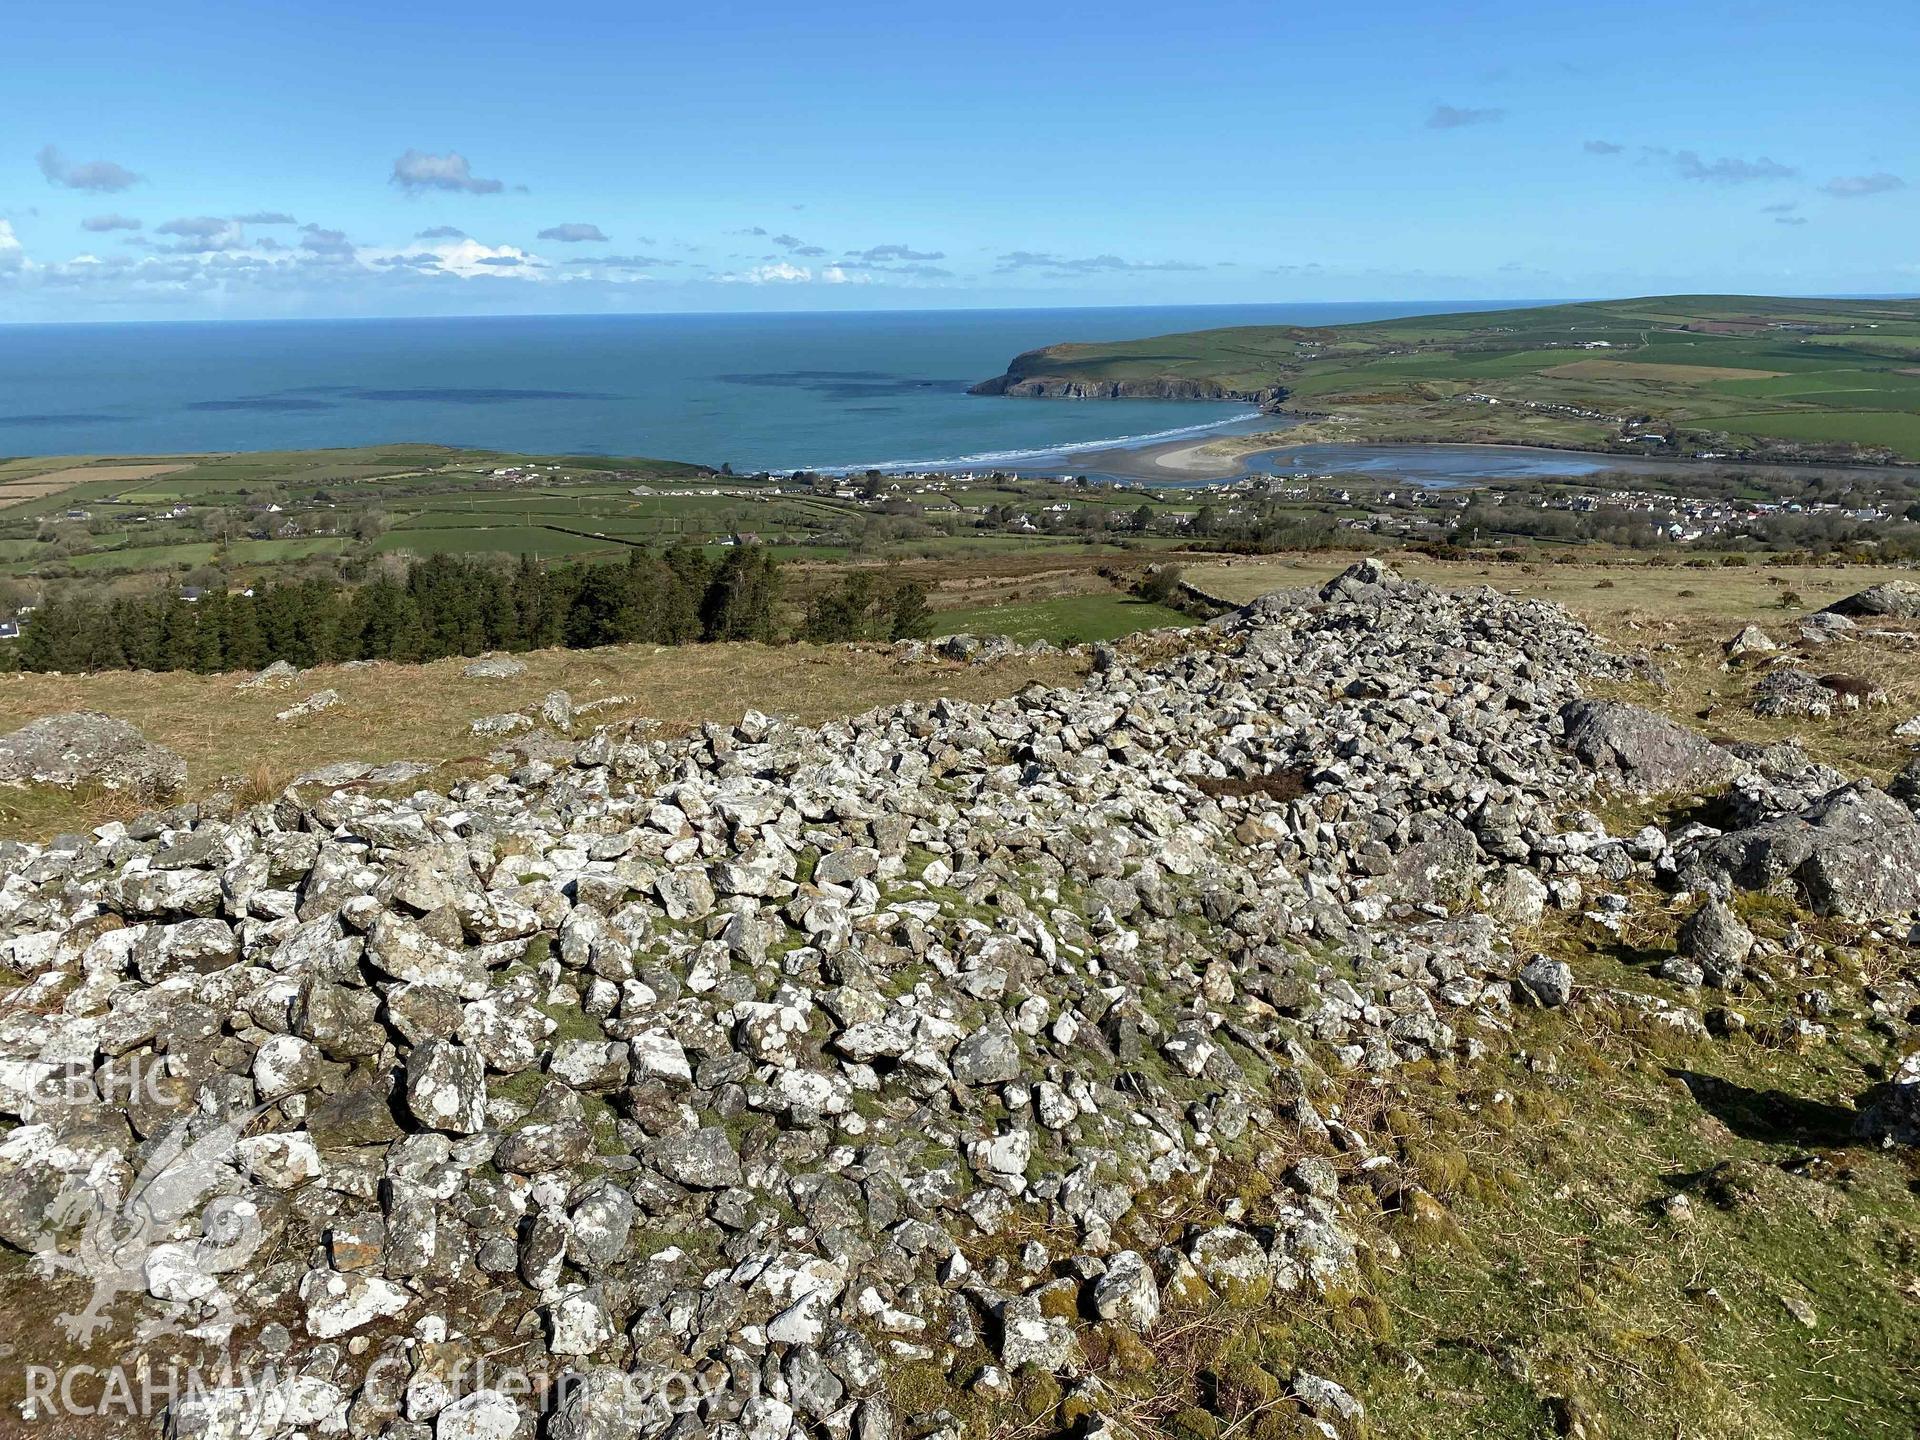 Digital photograph of collapsed walling at Carn Ffoi defended enclosure, produced by Paul Davis in 2020